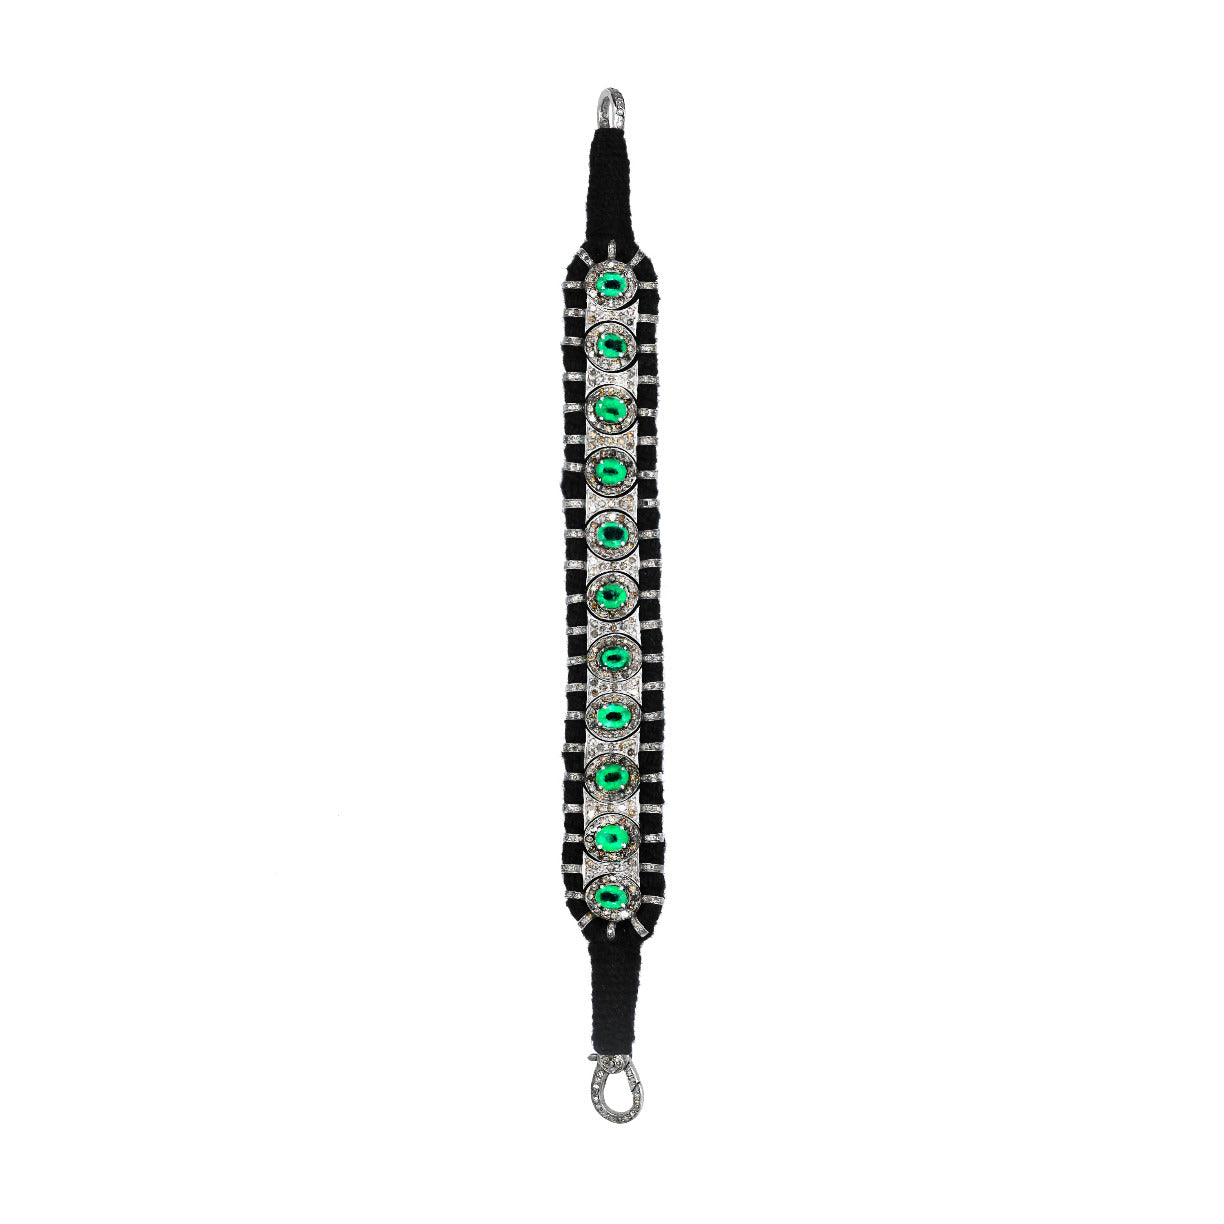 Sao Paulo Black and Emeralds bracelet in 925 silver and diamonds